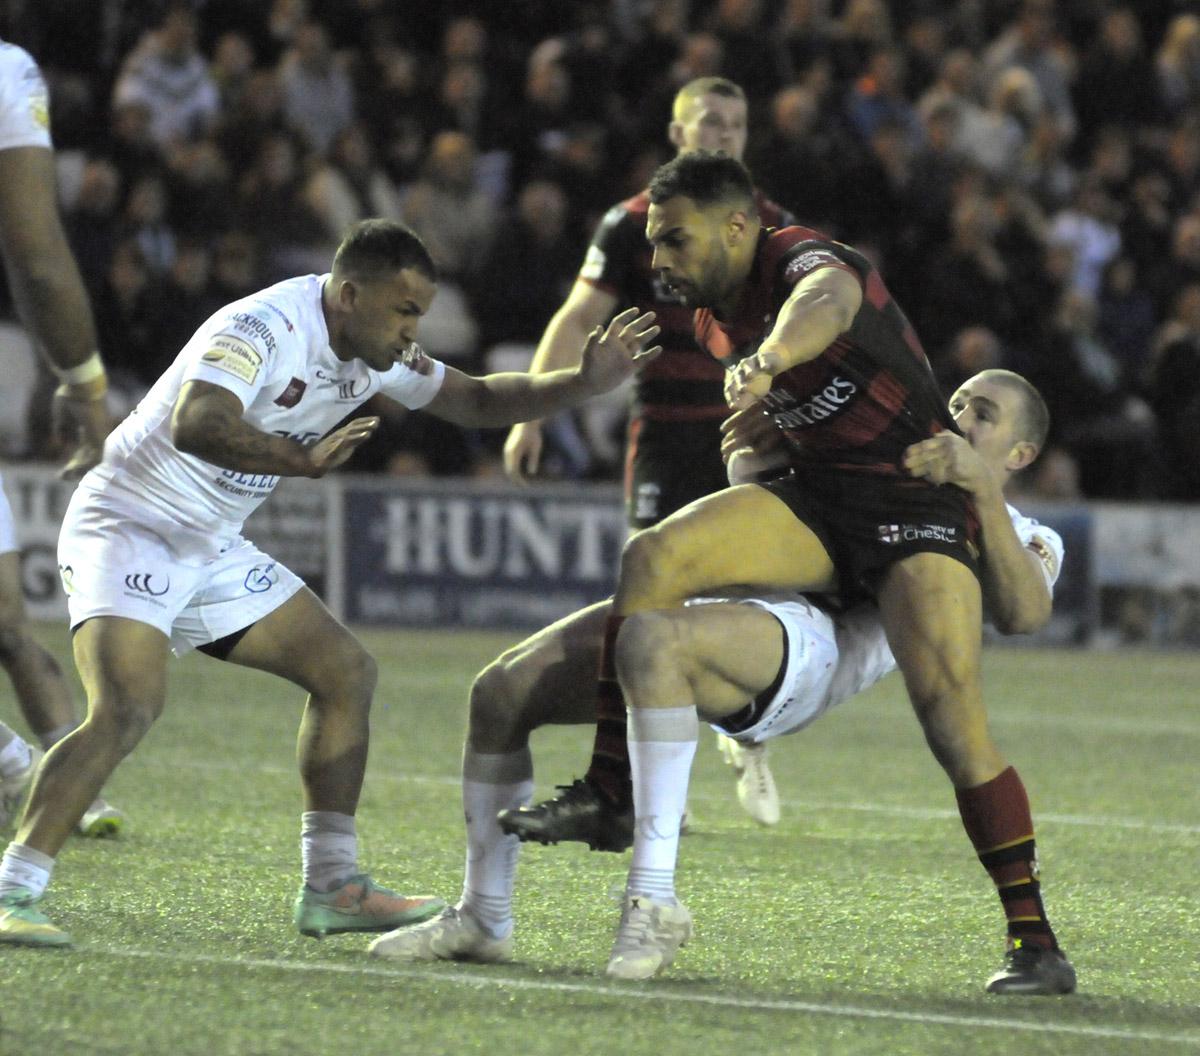 Super League Round 12 action from the Select Security Stadium. Pictures by Mike Boden